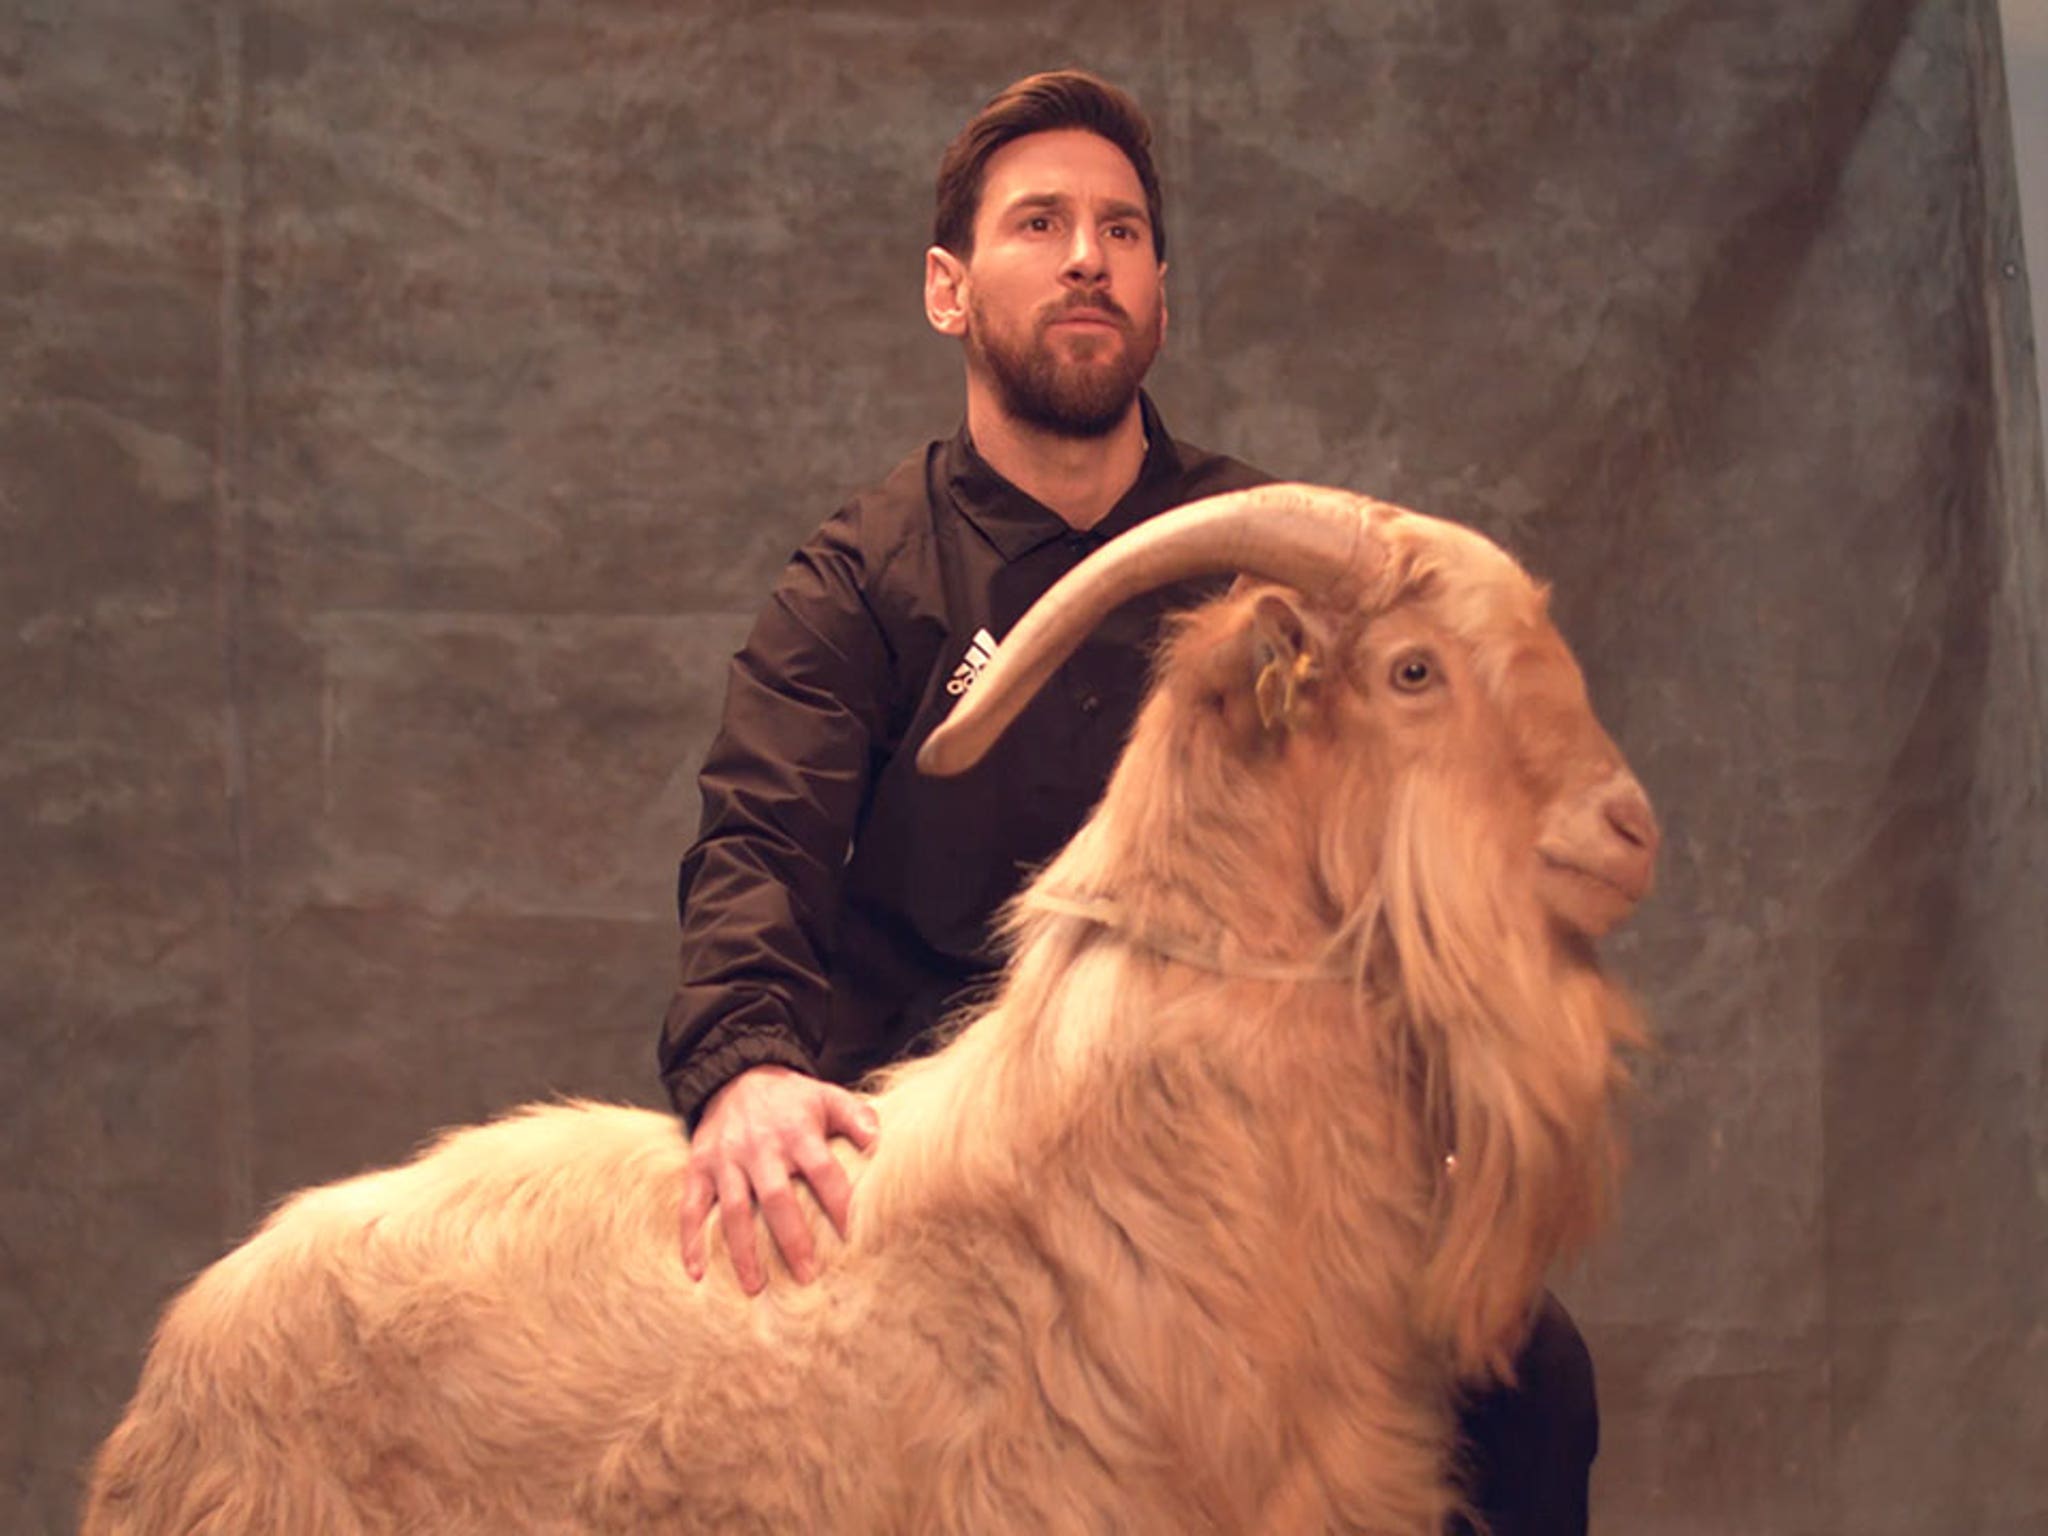 Lionel Messi Poses with Goats While Saying He's Not the G.O.A.T